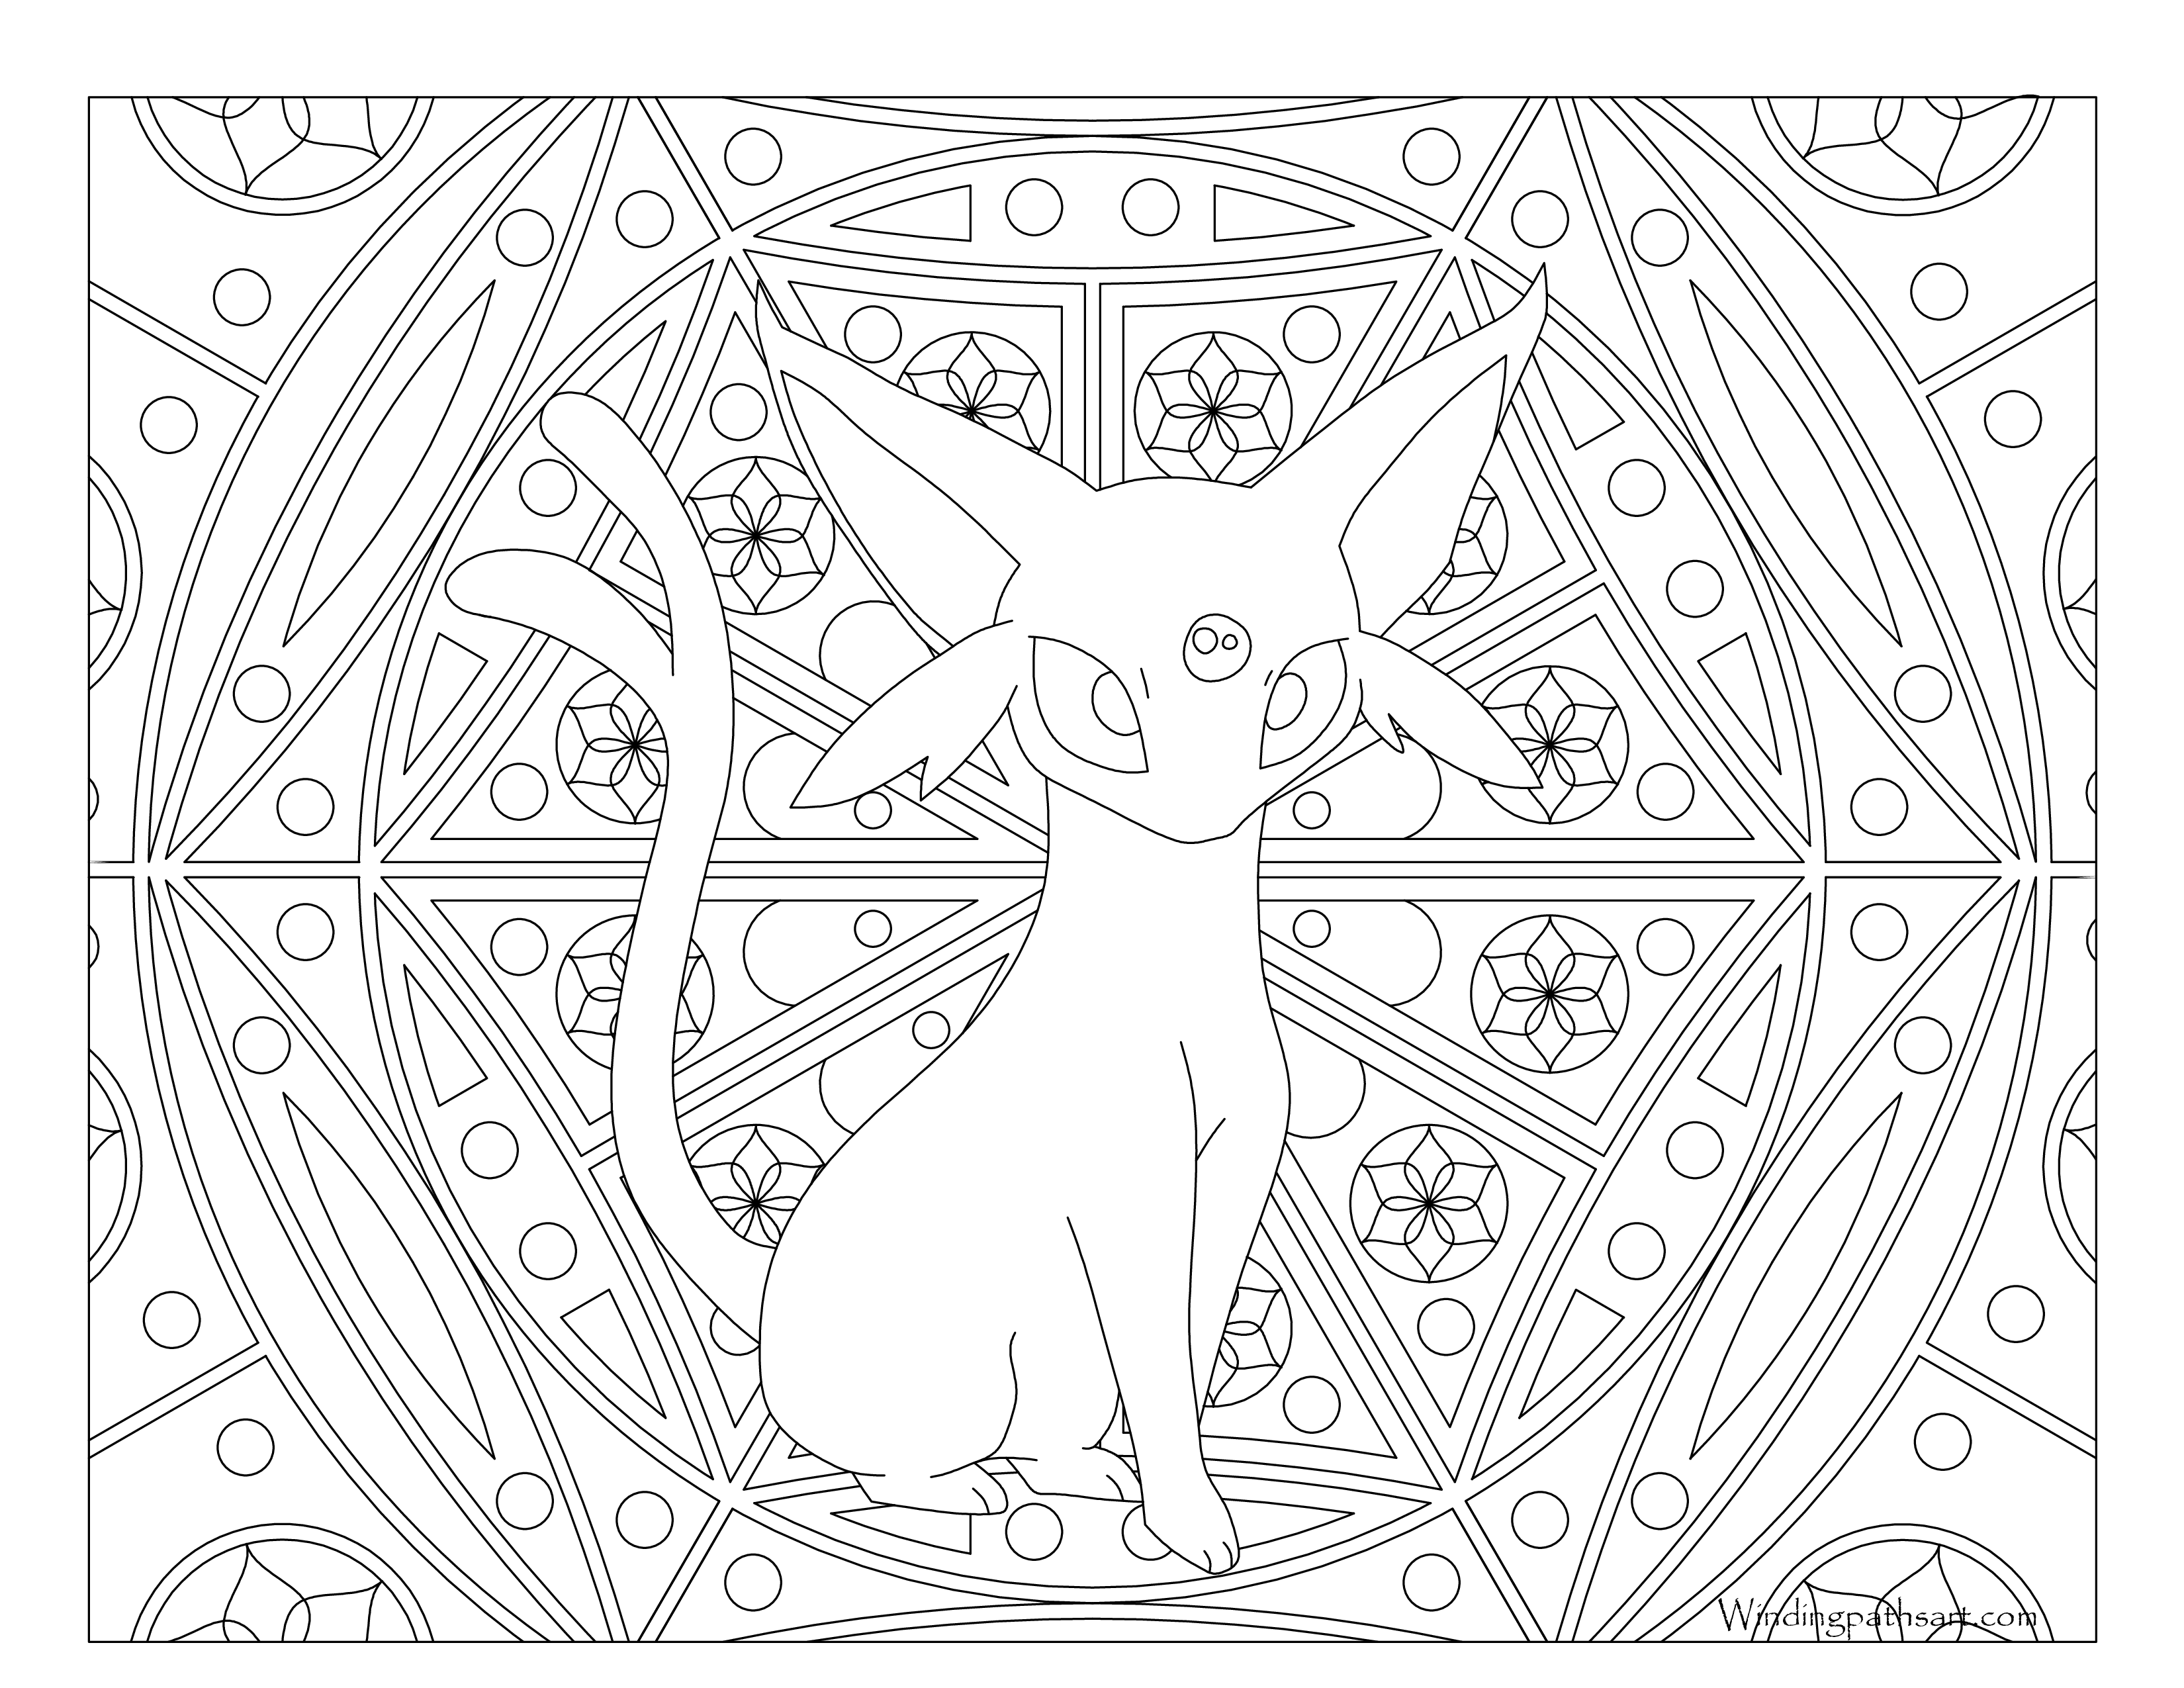 Pokemon Espeon Coloring Pages